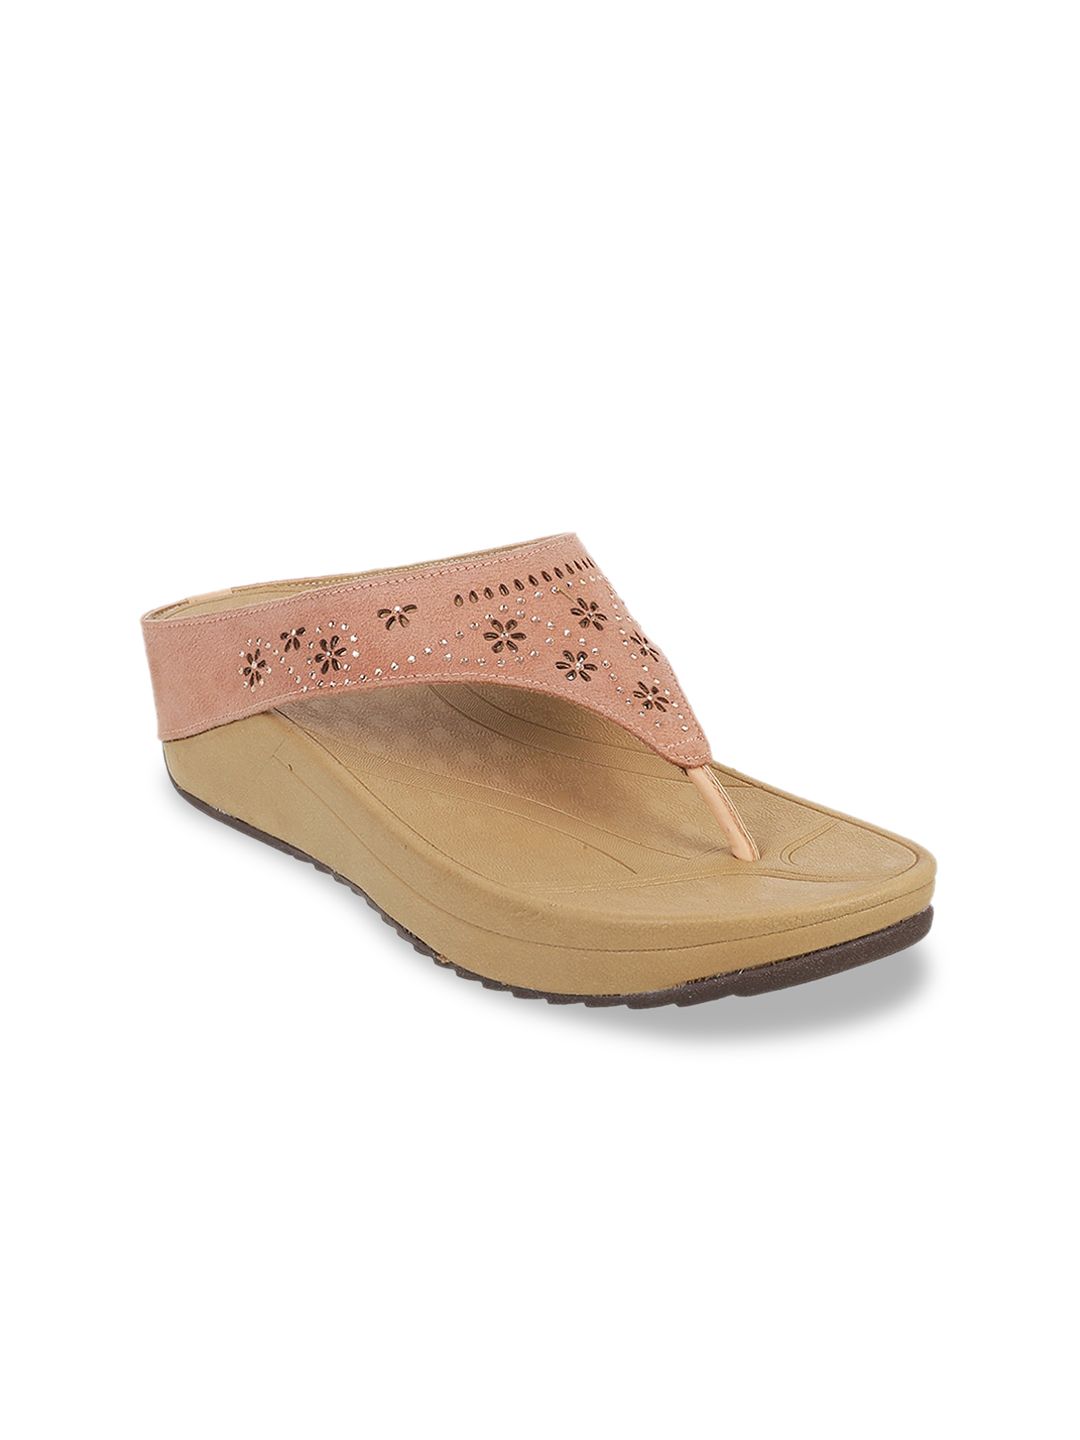 Metro Women Peach-Coloured Embellished Sandals Price in India